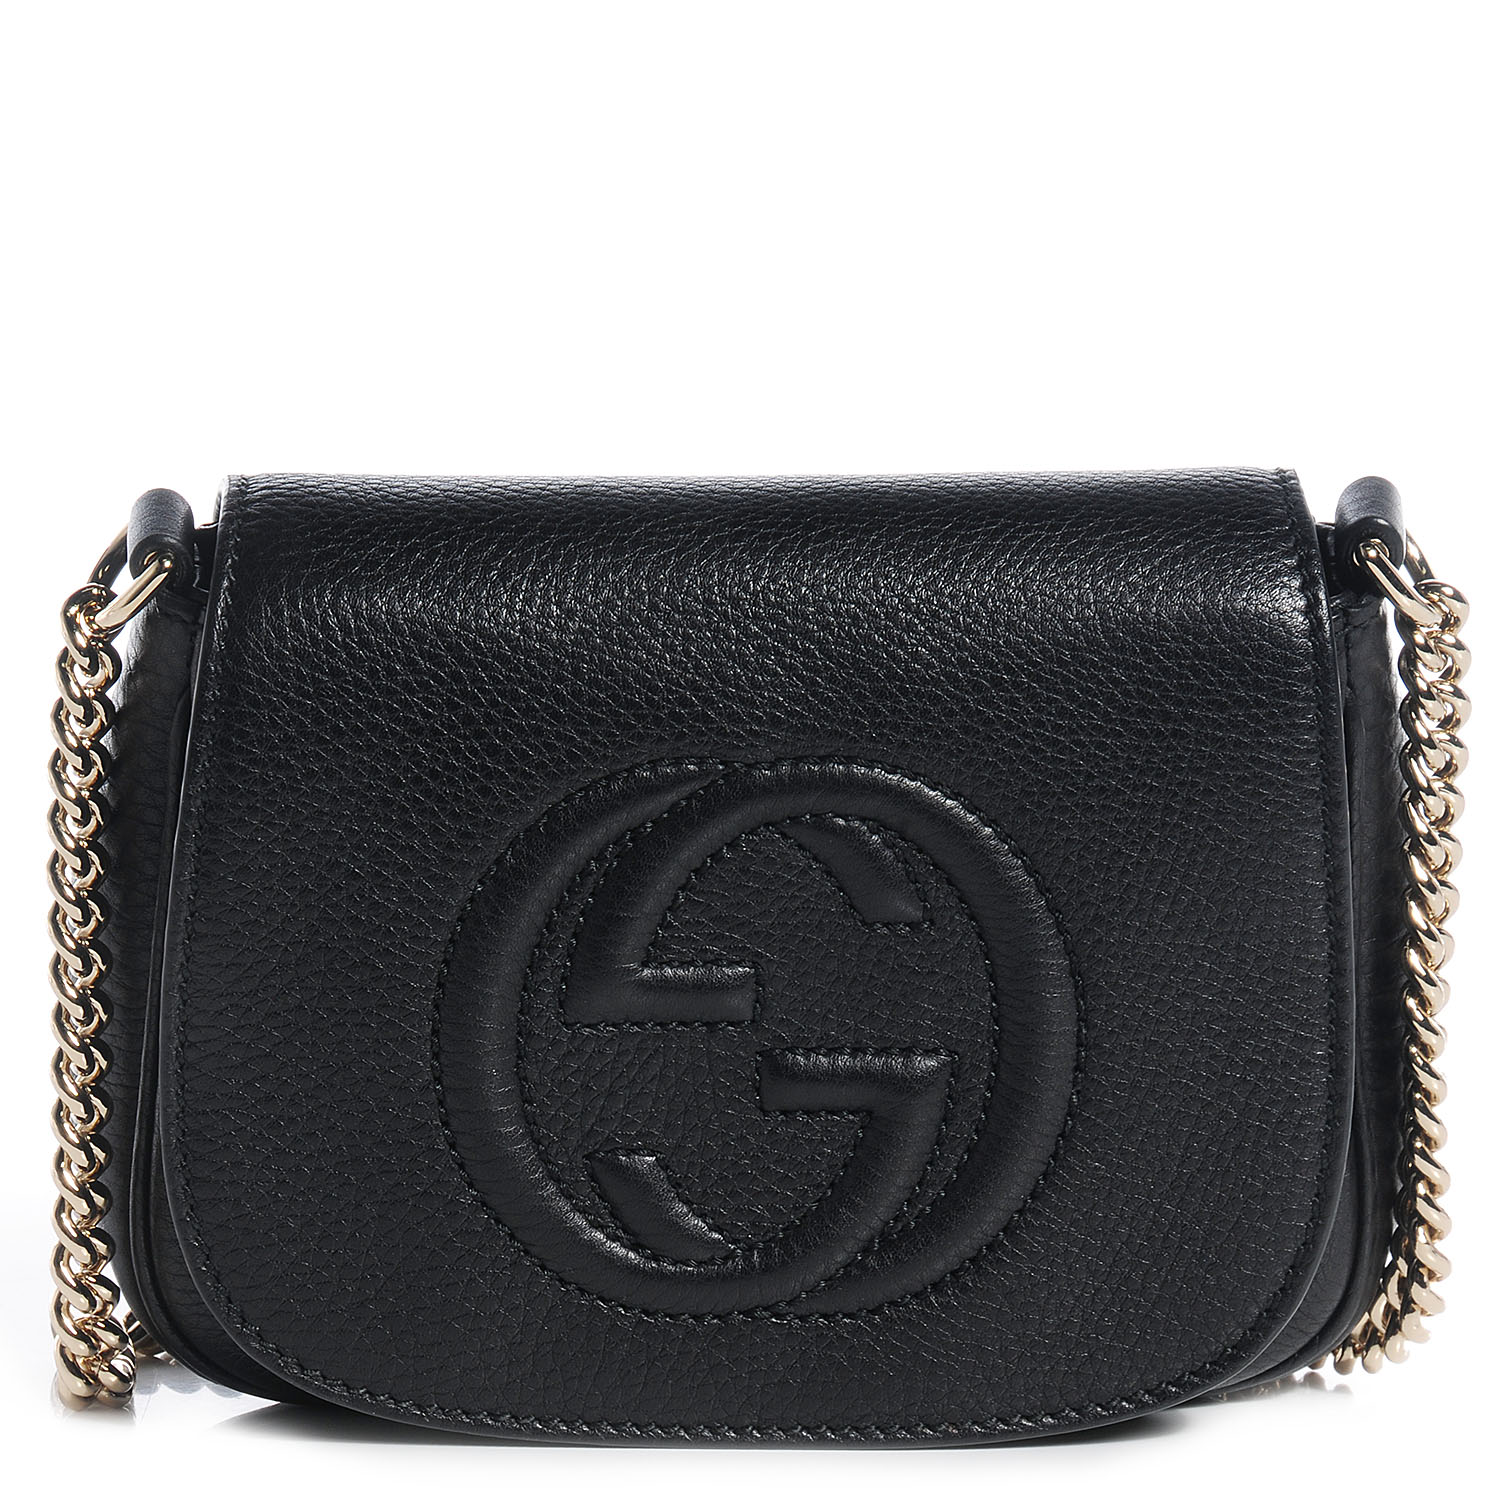 GUCCI Leather Small Soho Chain Shoulder Bag Black 75174